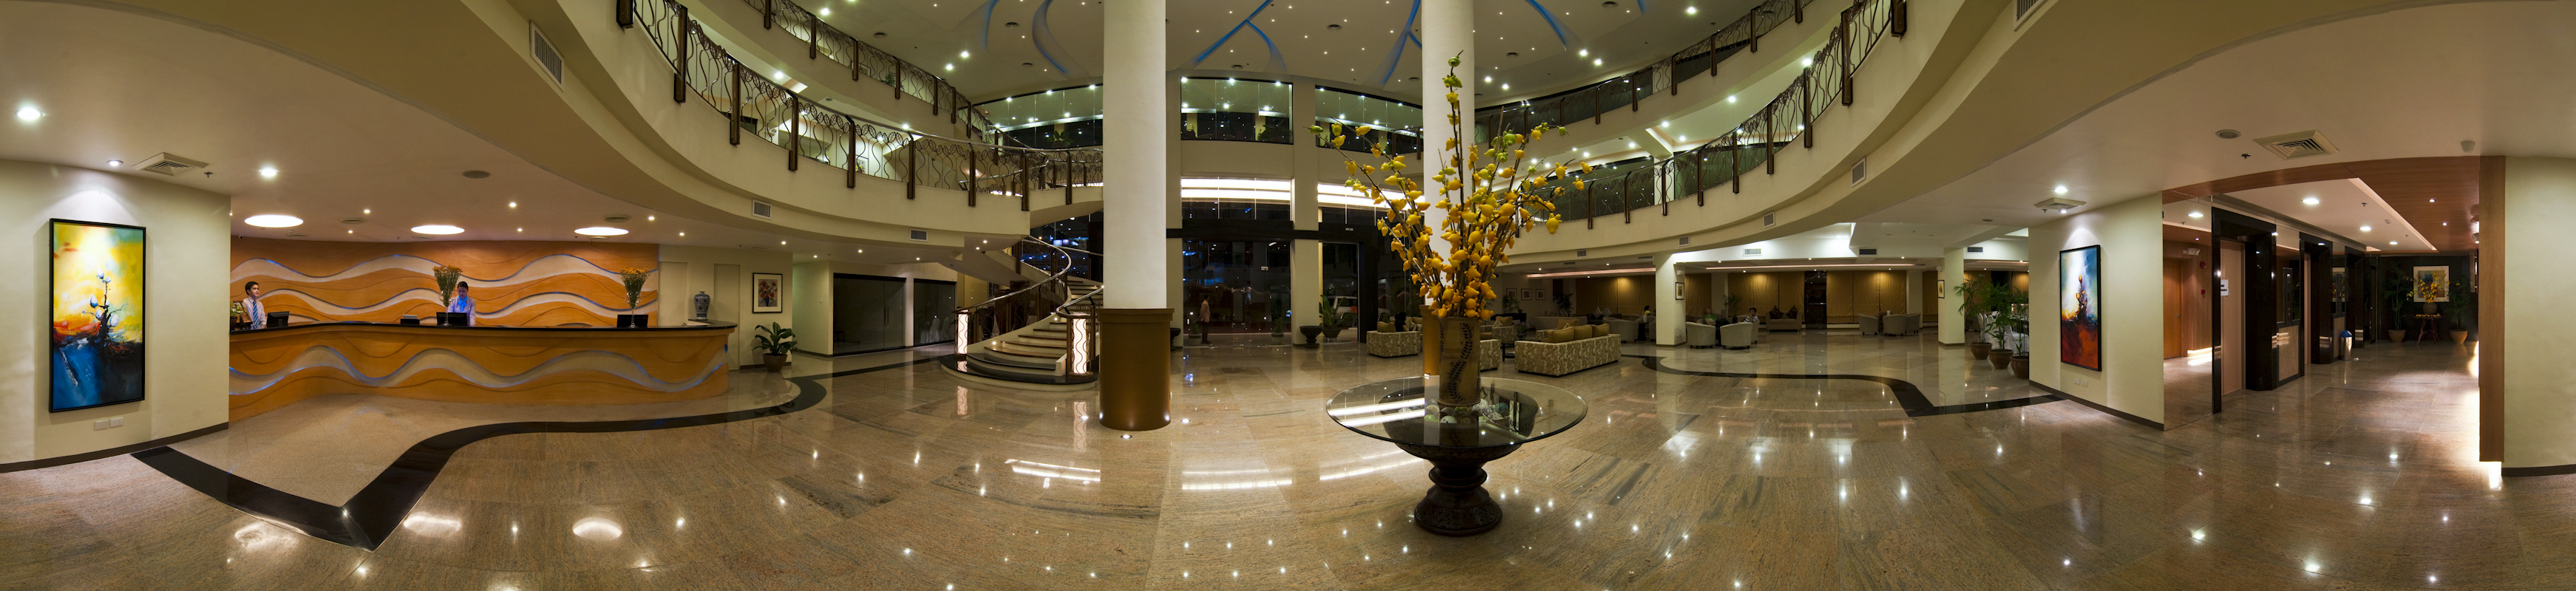 The Pinnacle Hotel and Suites - Lobby 12